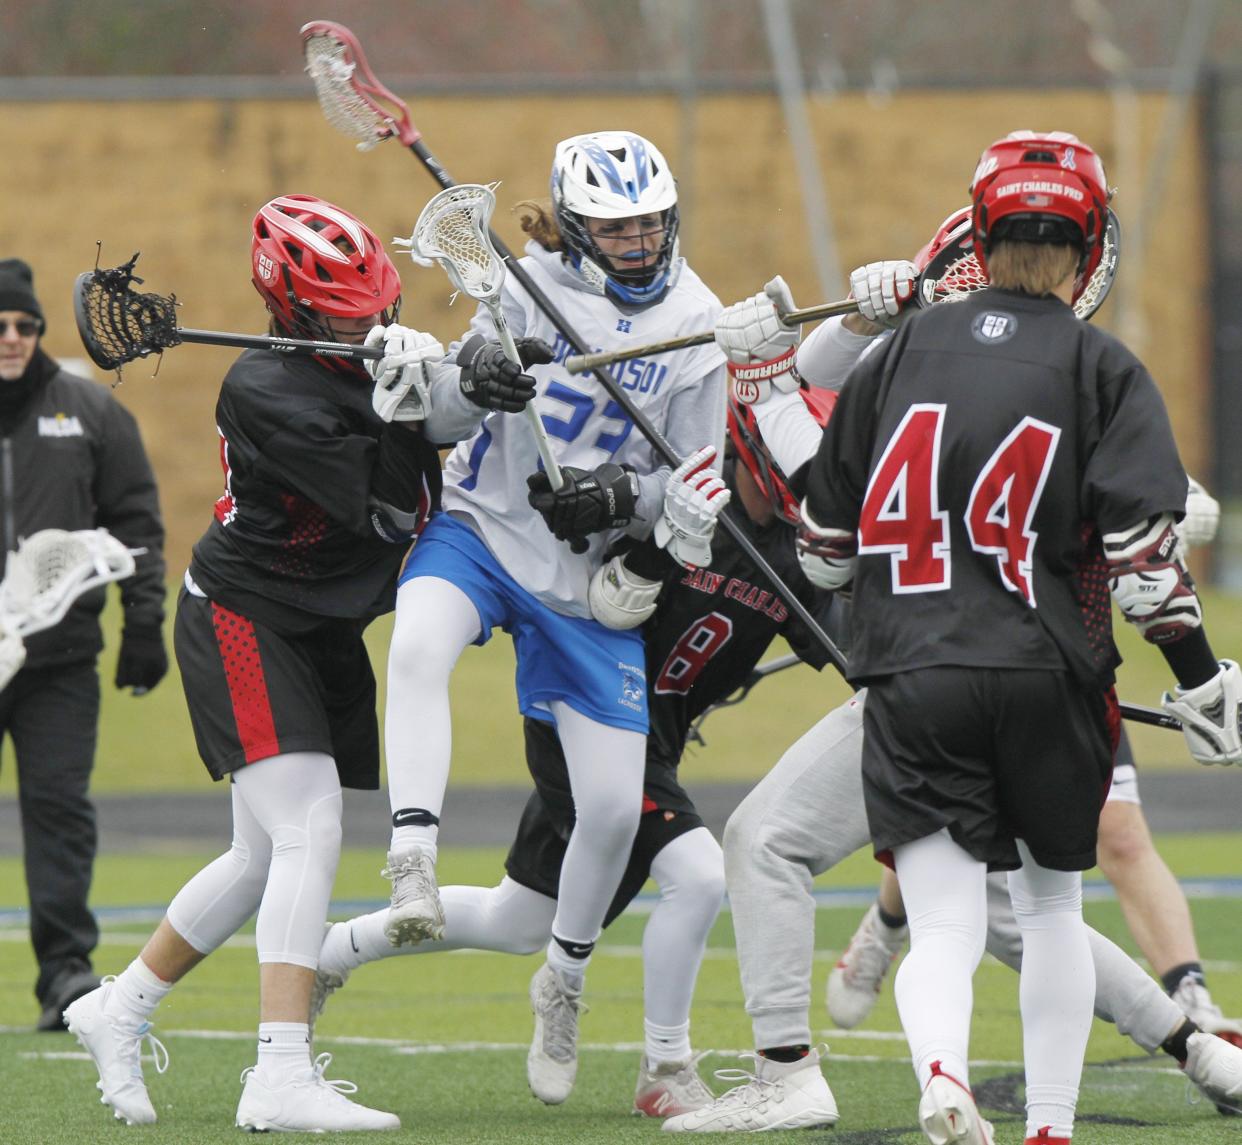 Senior attacker Kaden Ames was named first-team all-region and second-team all-league for Davidson. He had 51 goals and 30 assists while playing 15 games. The Wildcats went 16-6 and reached the Division I, Region 3 final for the first time.